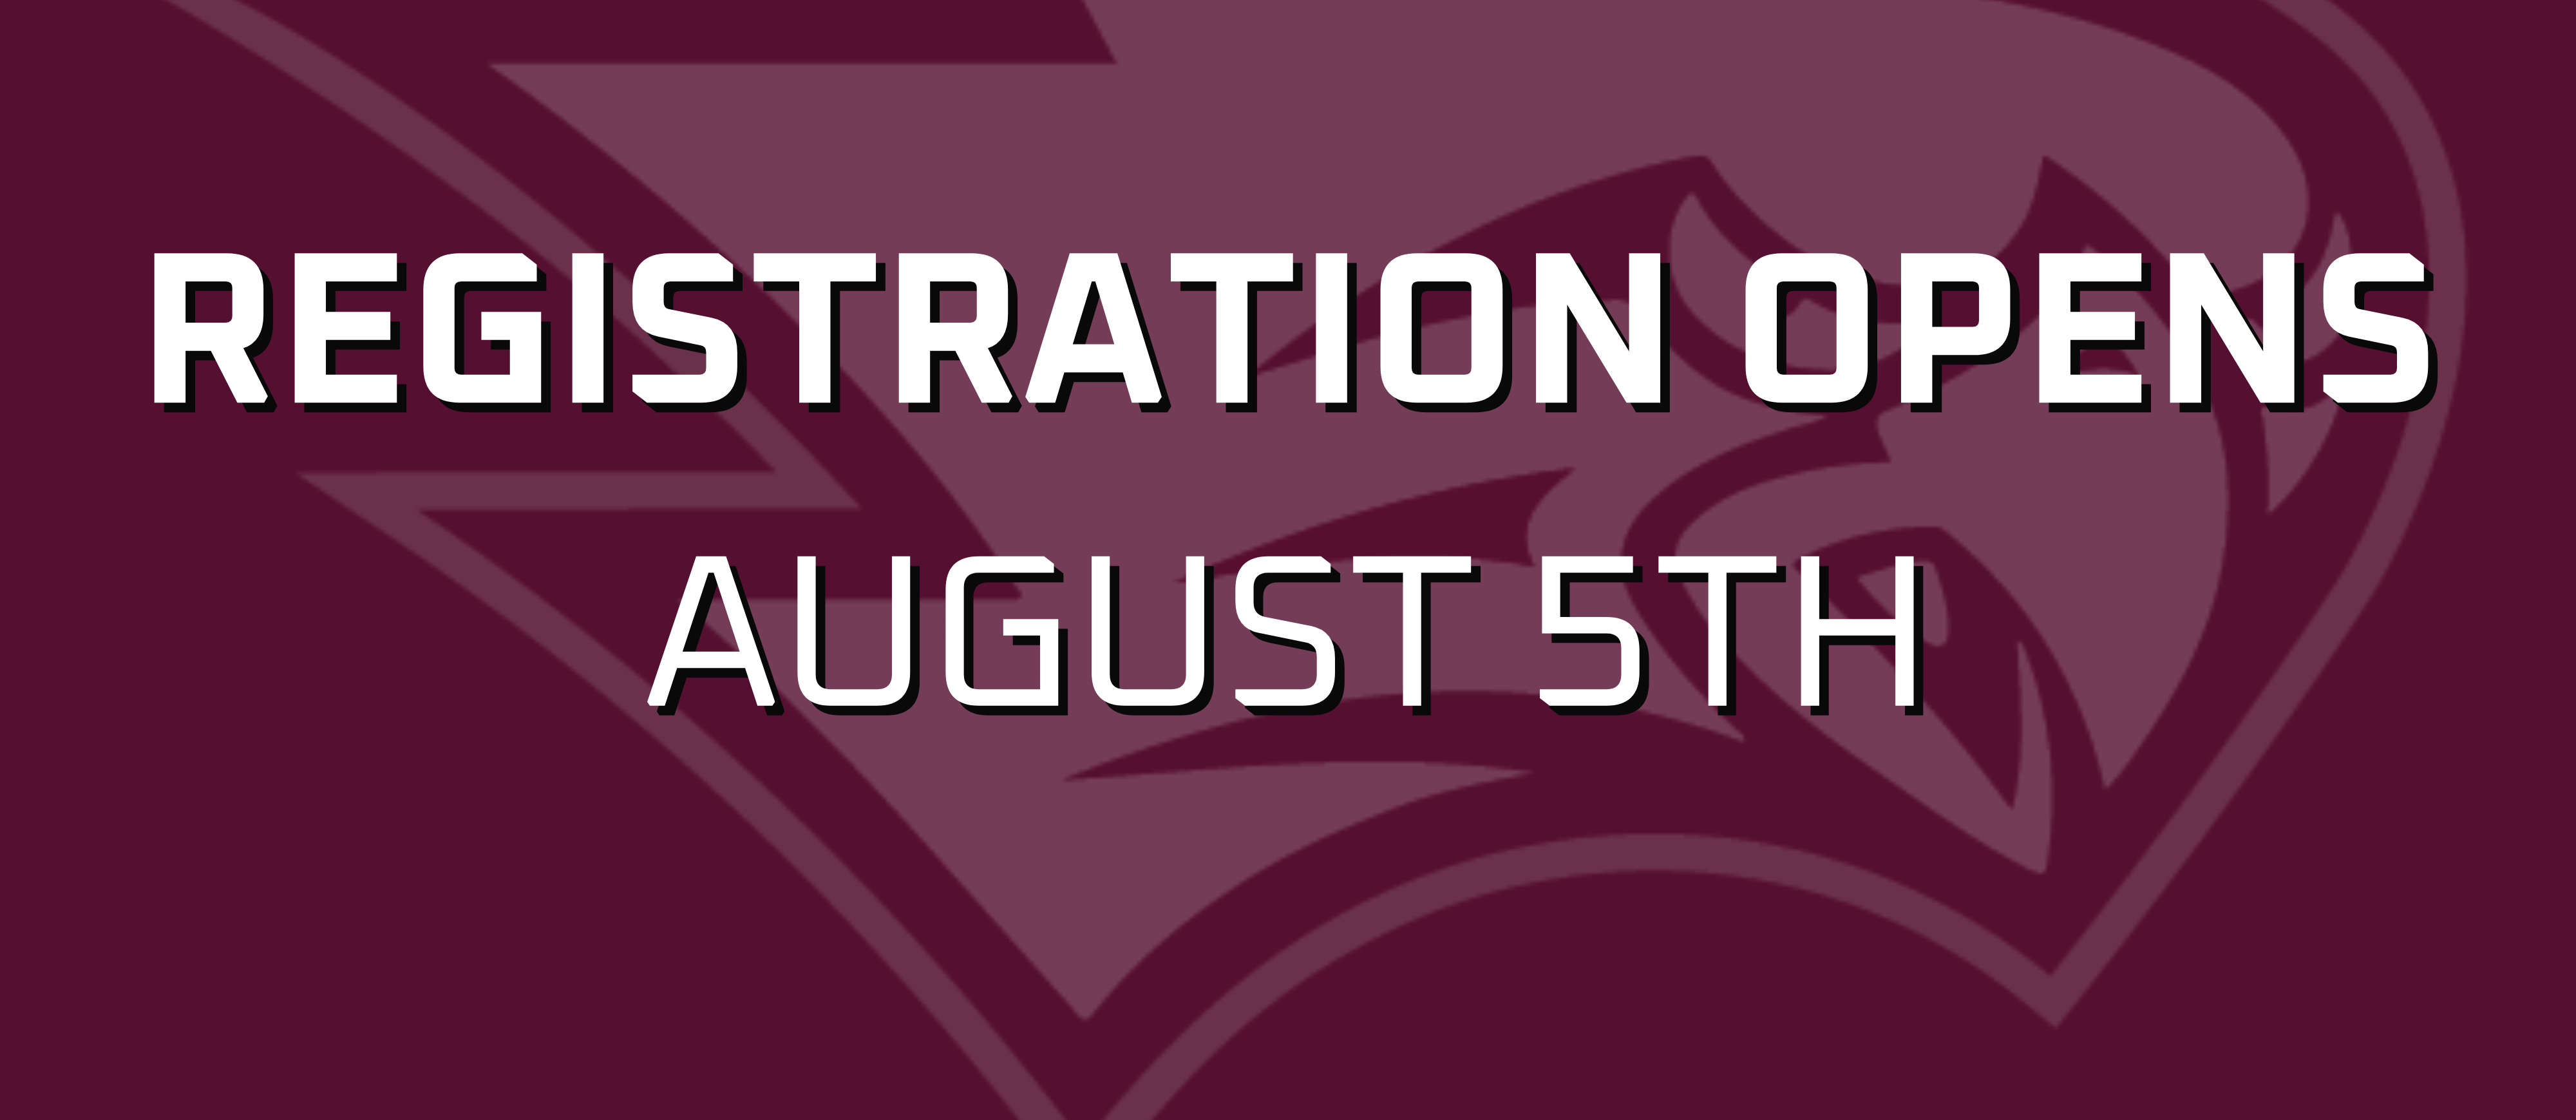 Registration Opens August 5th